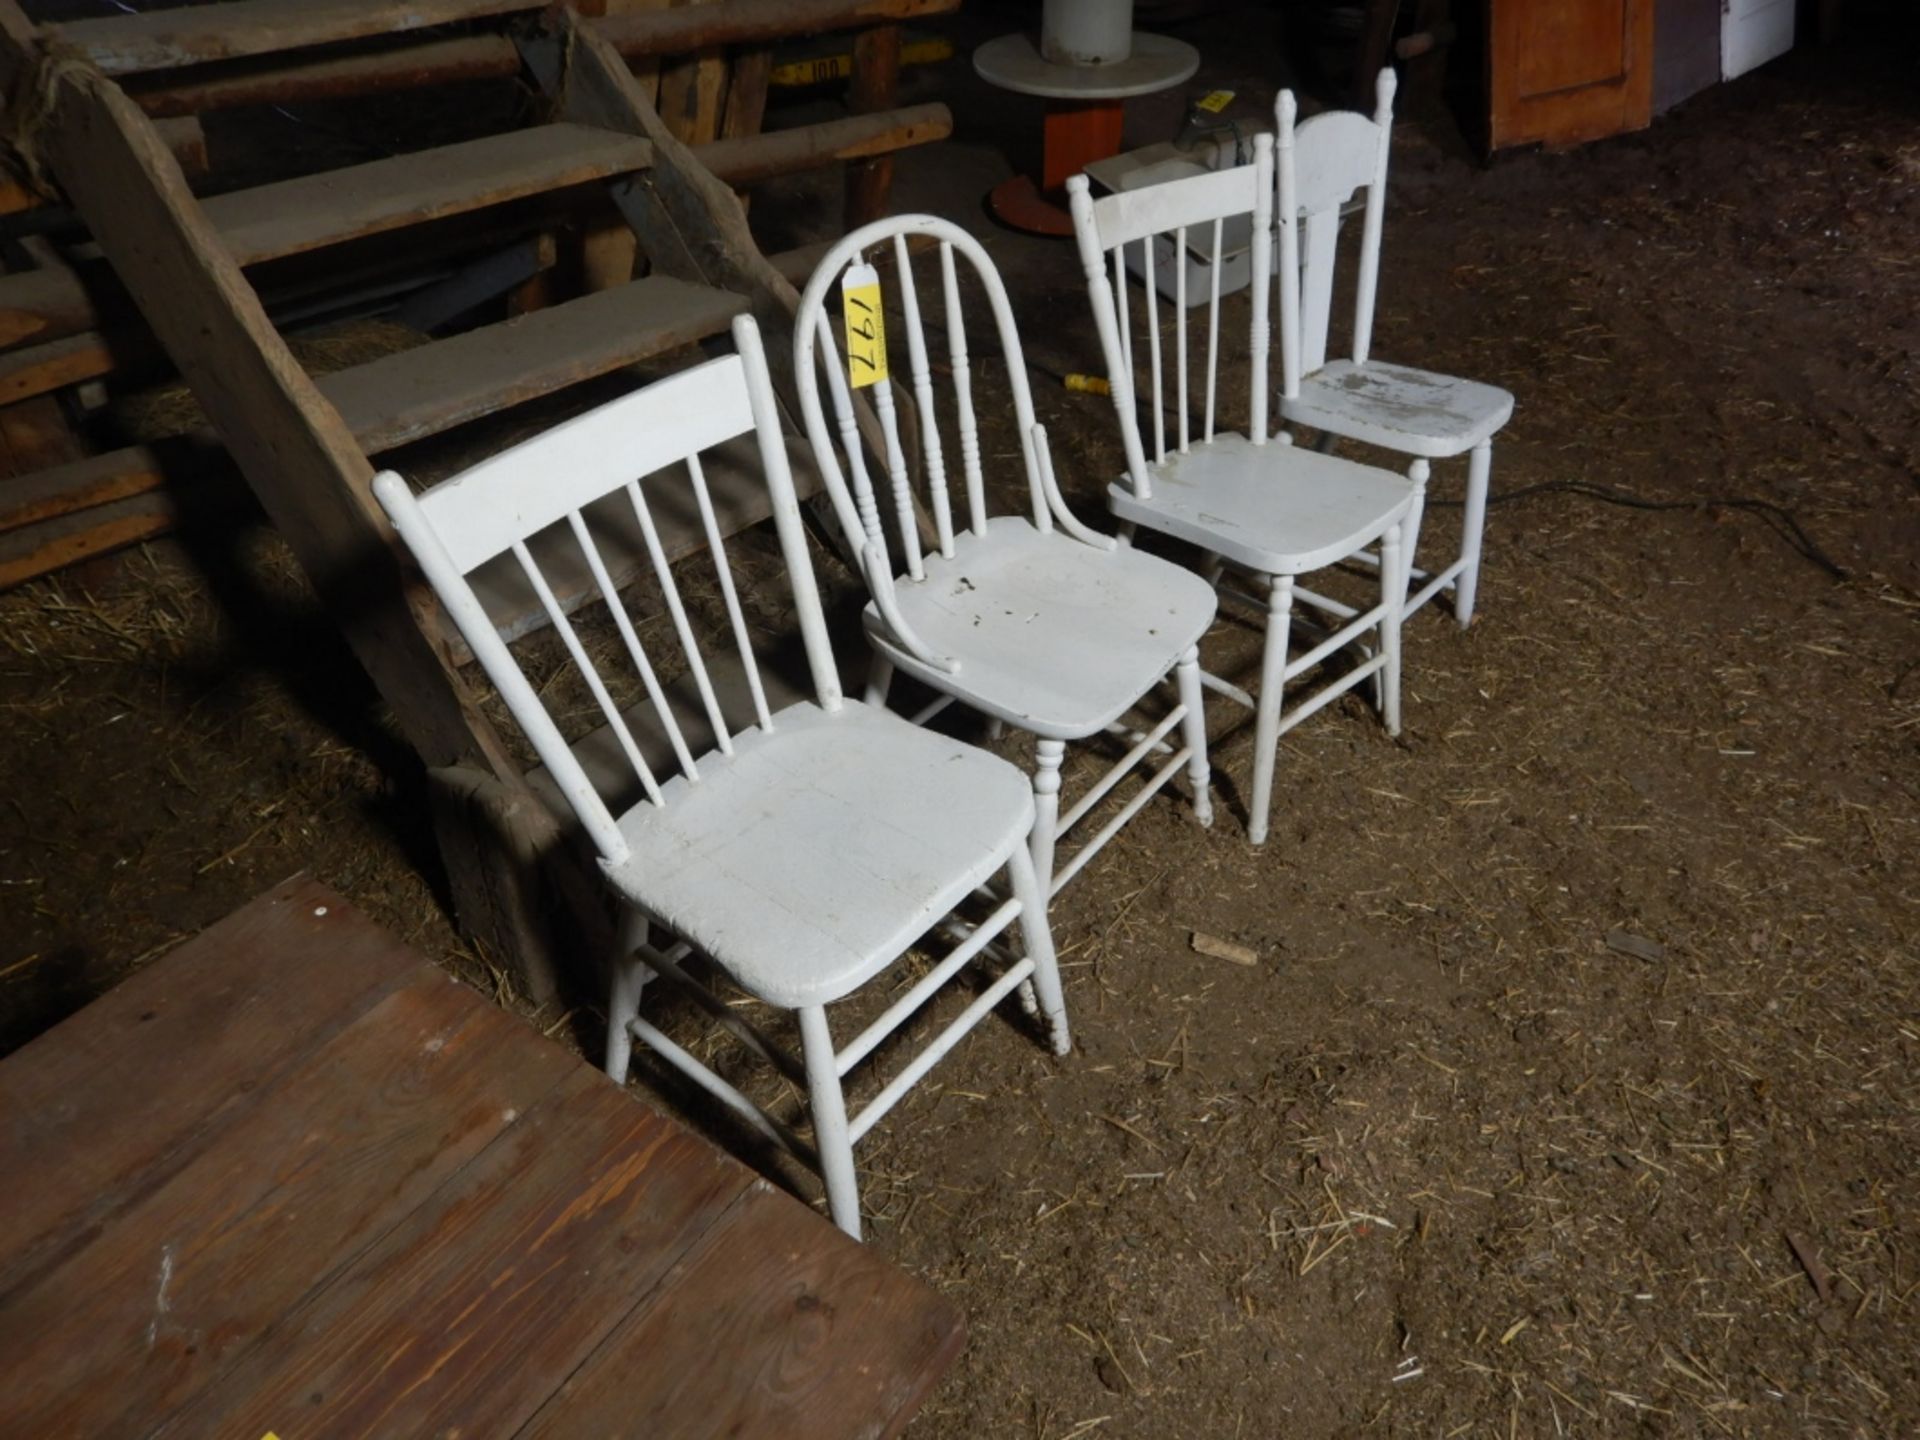 4-ASSORTED WOODEN CHAIRS PAINTED WHITE - Image 2 of 2